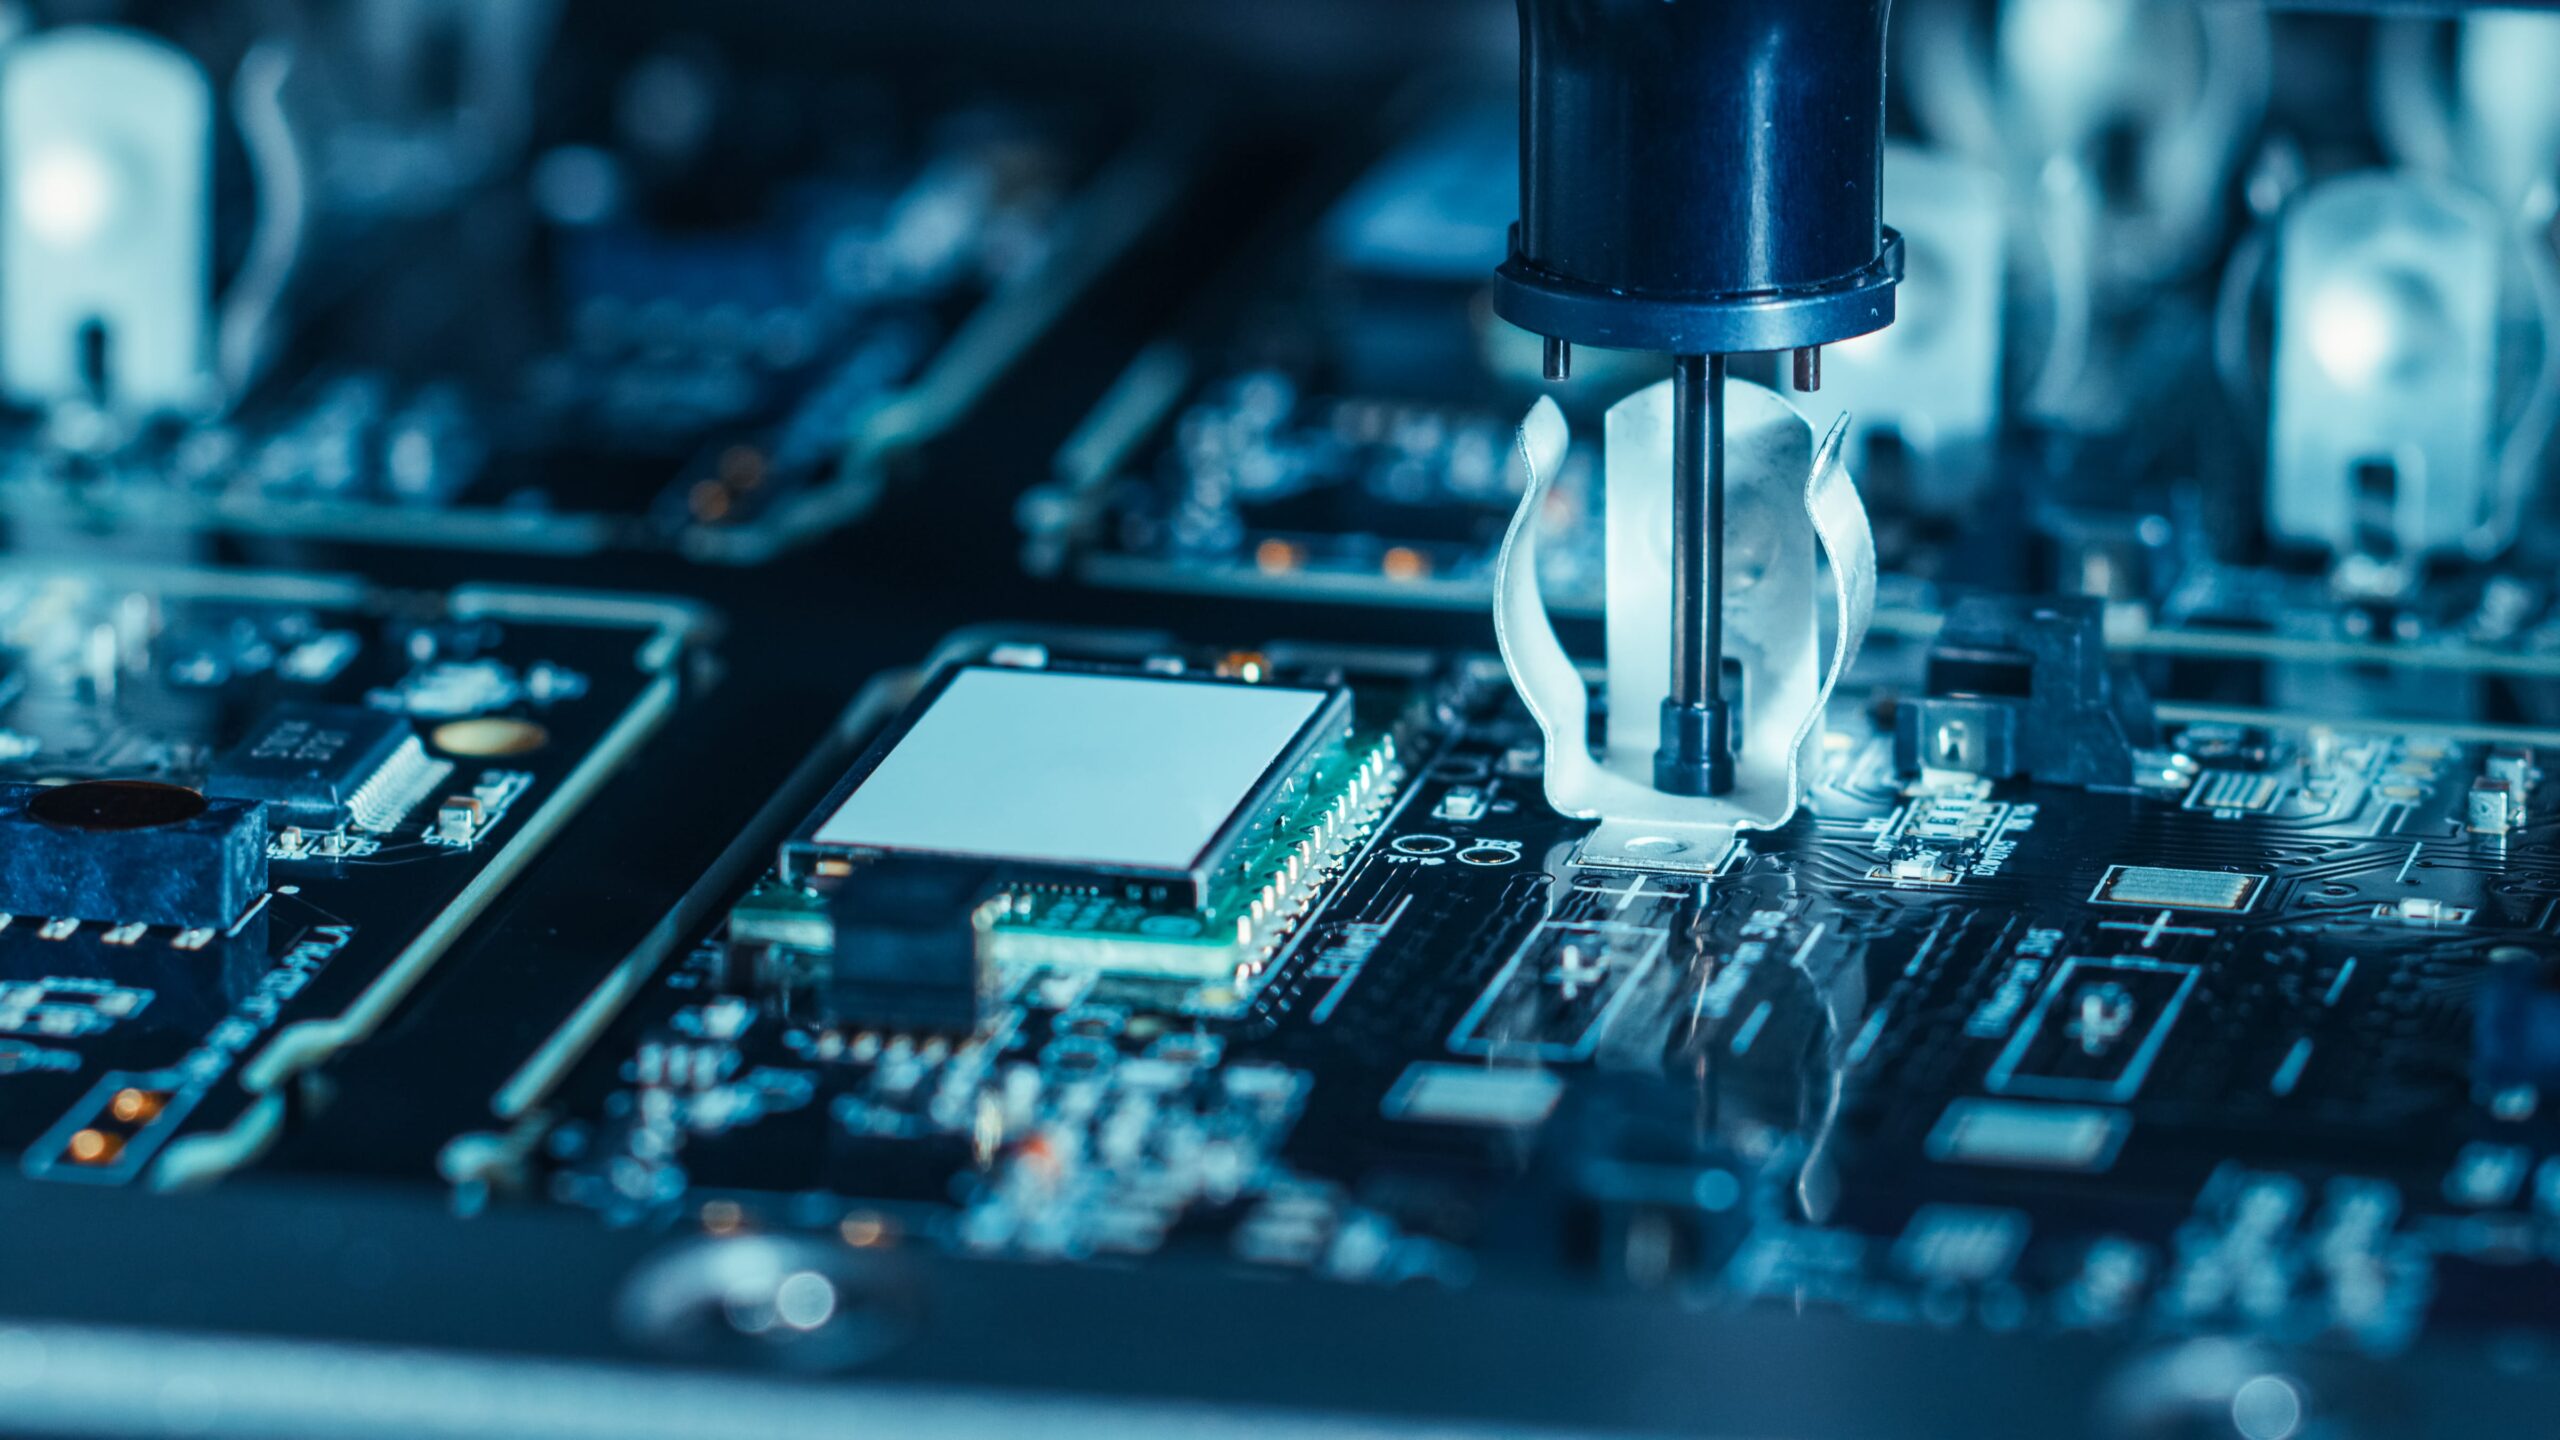 
The Ultimate Guide to Joint Ventures in the Electronics Manufacturing Industry: What You Need to Know